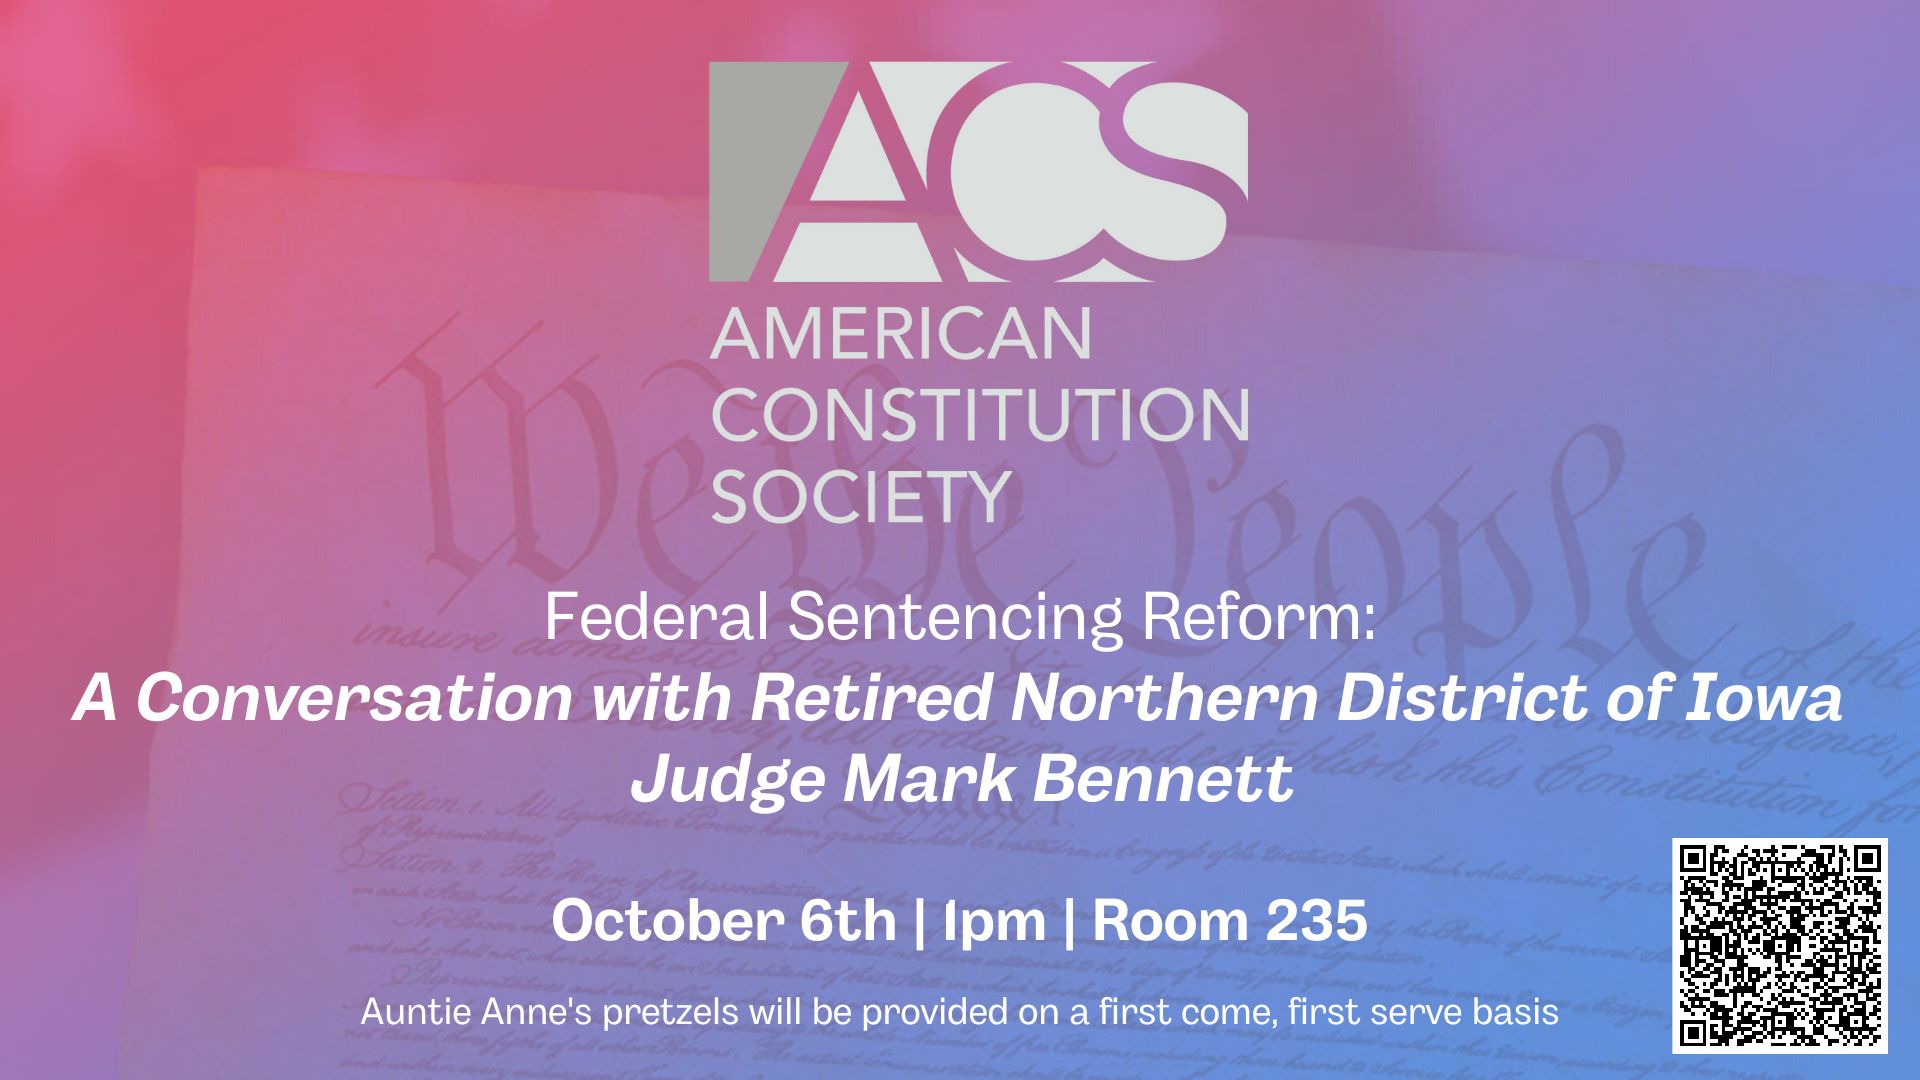  American Constitution Society presents - Federal Sentencing Reform: A Conversation with Retired Northern District of Iowa Judge Mark Bennett    October 6th | 1pm | Room 235    Auntie Anne's pretzels will be provided on a first come, first serve basis